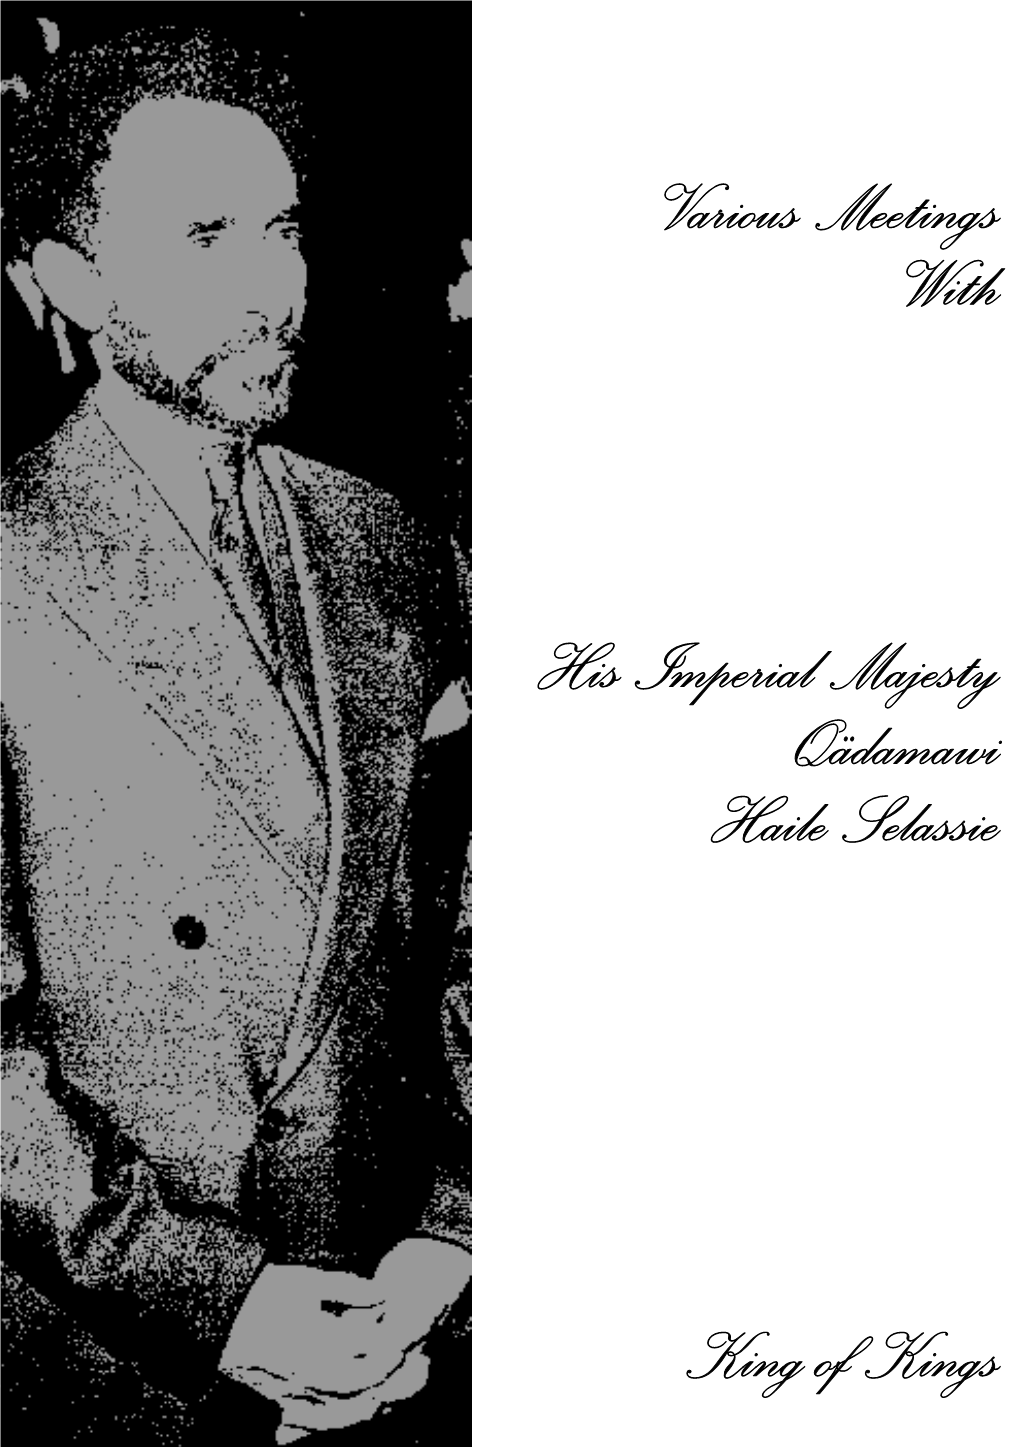 Various Meetings with His Imperial Majesty Qädamawi Haile Selassie